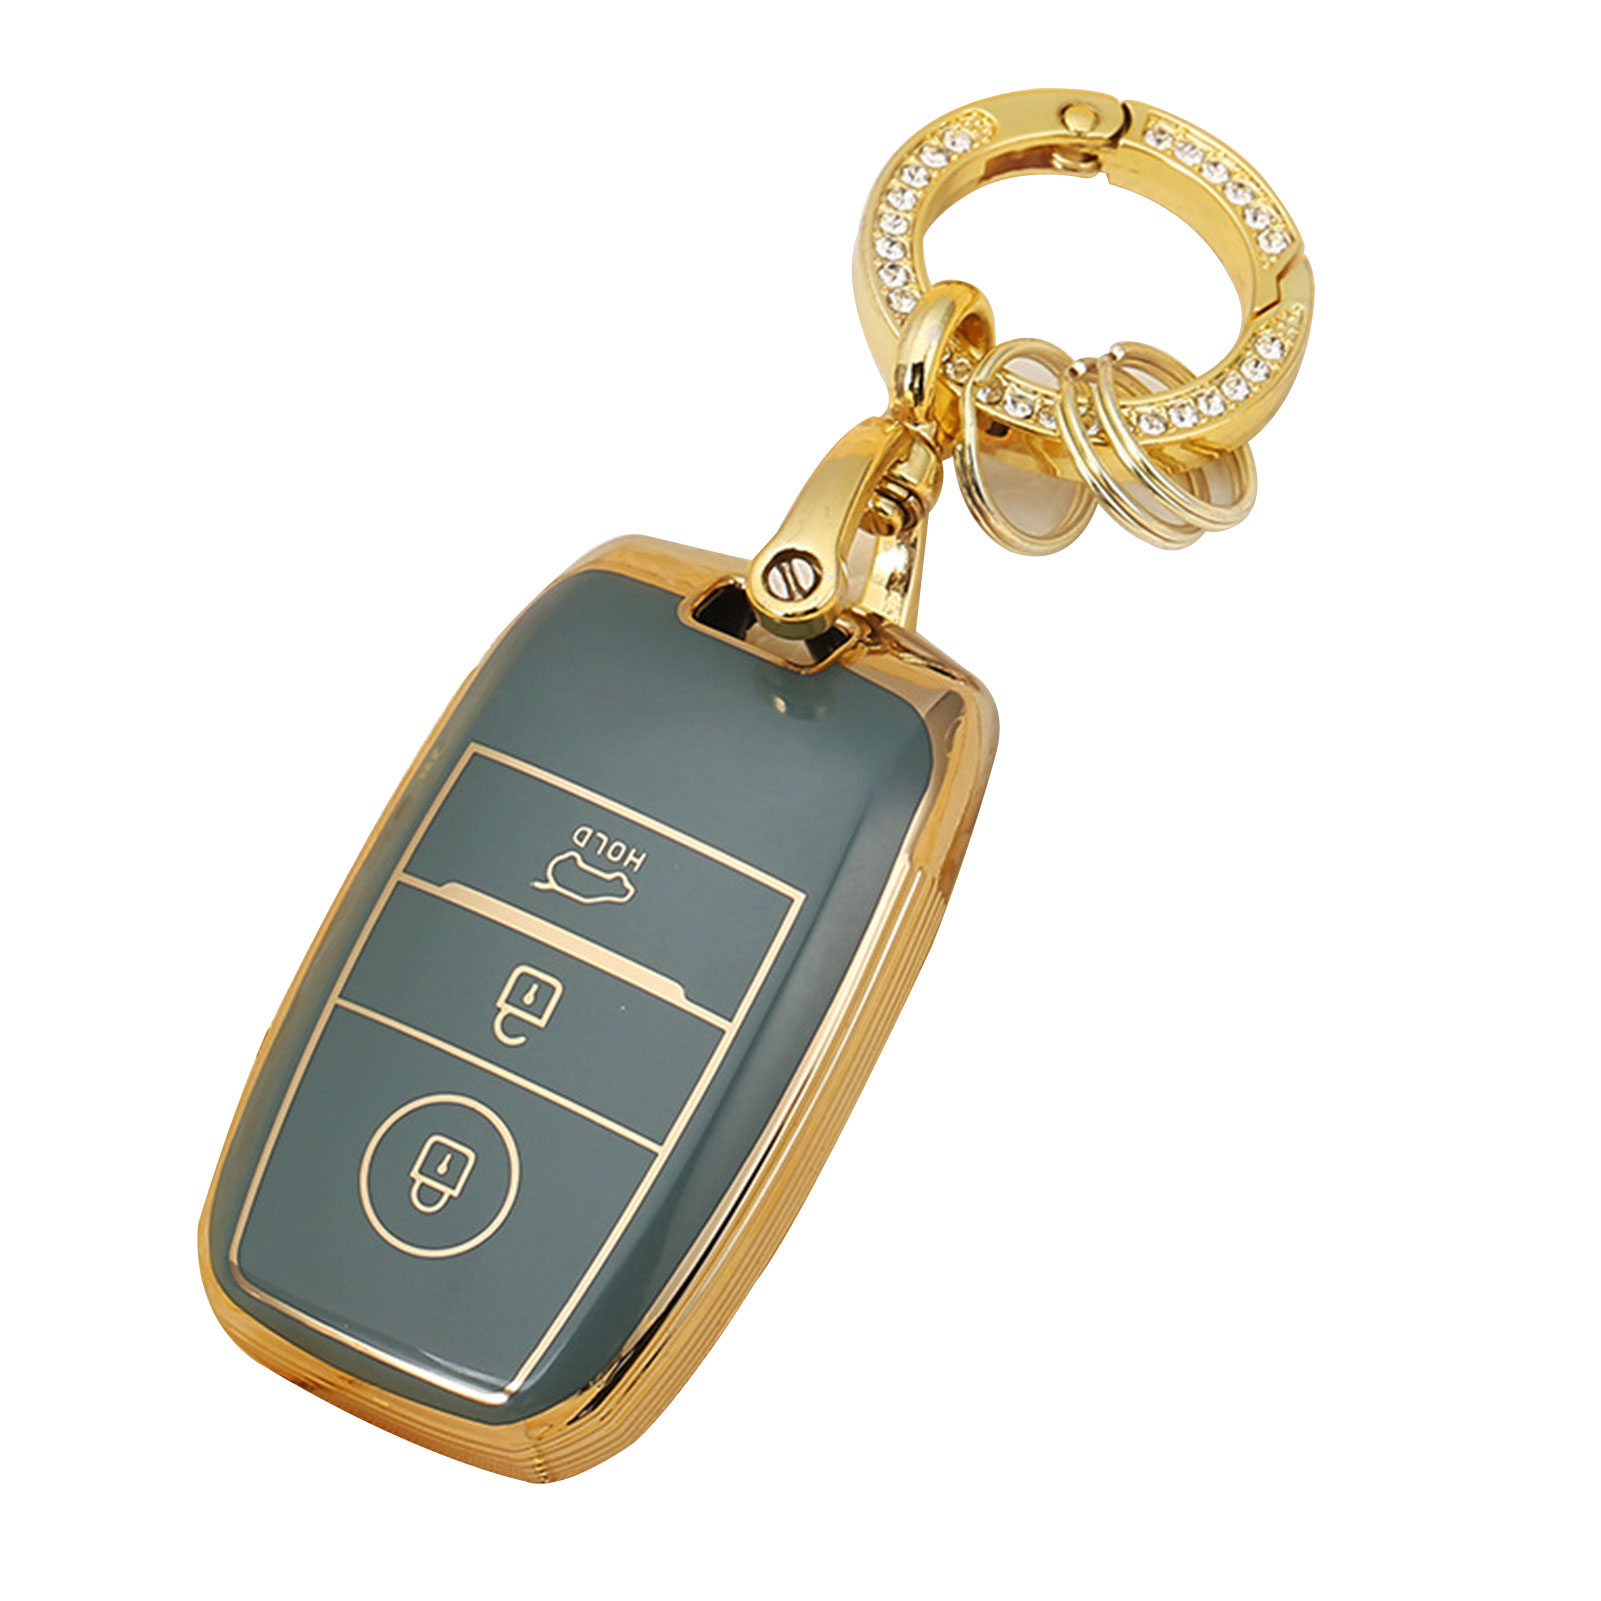  1797 Key Fob Cover for Kia Sedona Accessories Bling Keychain  Car Remote Case Protector Shell Cute Girly 6 Button White Gold TPU :  Automotive